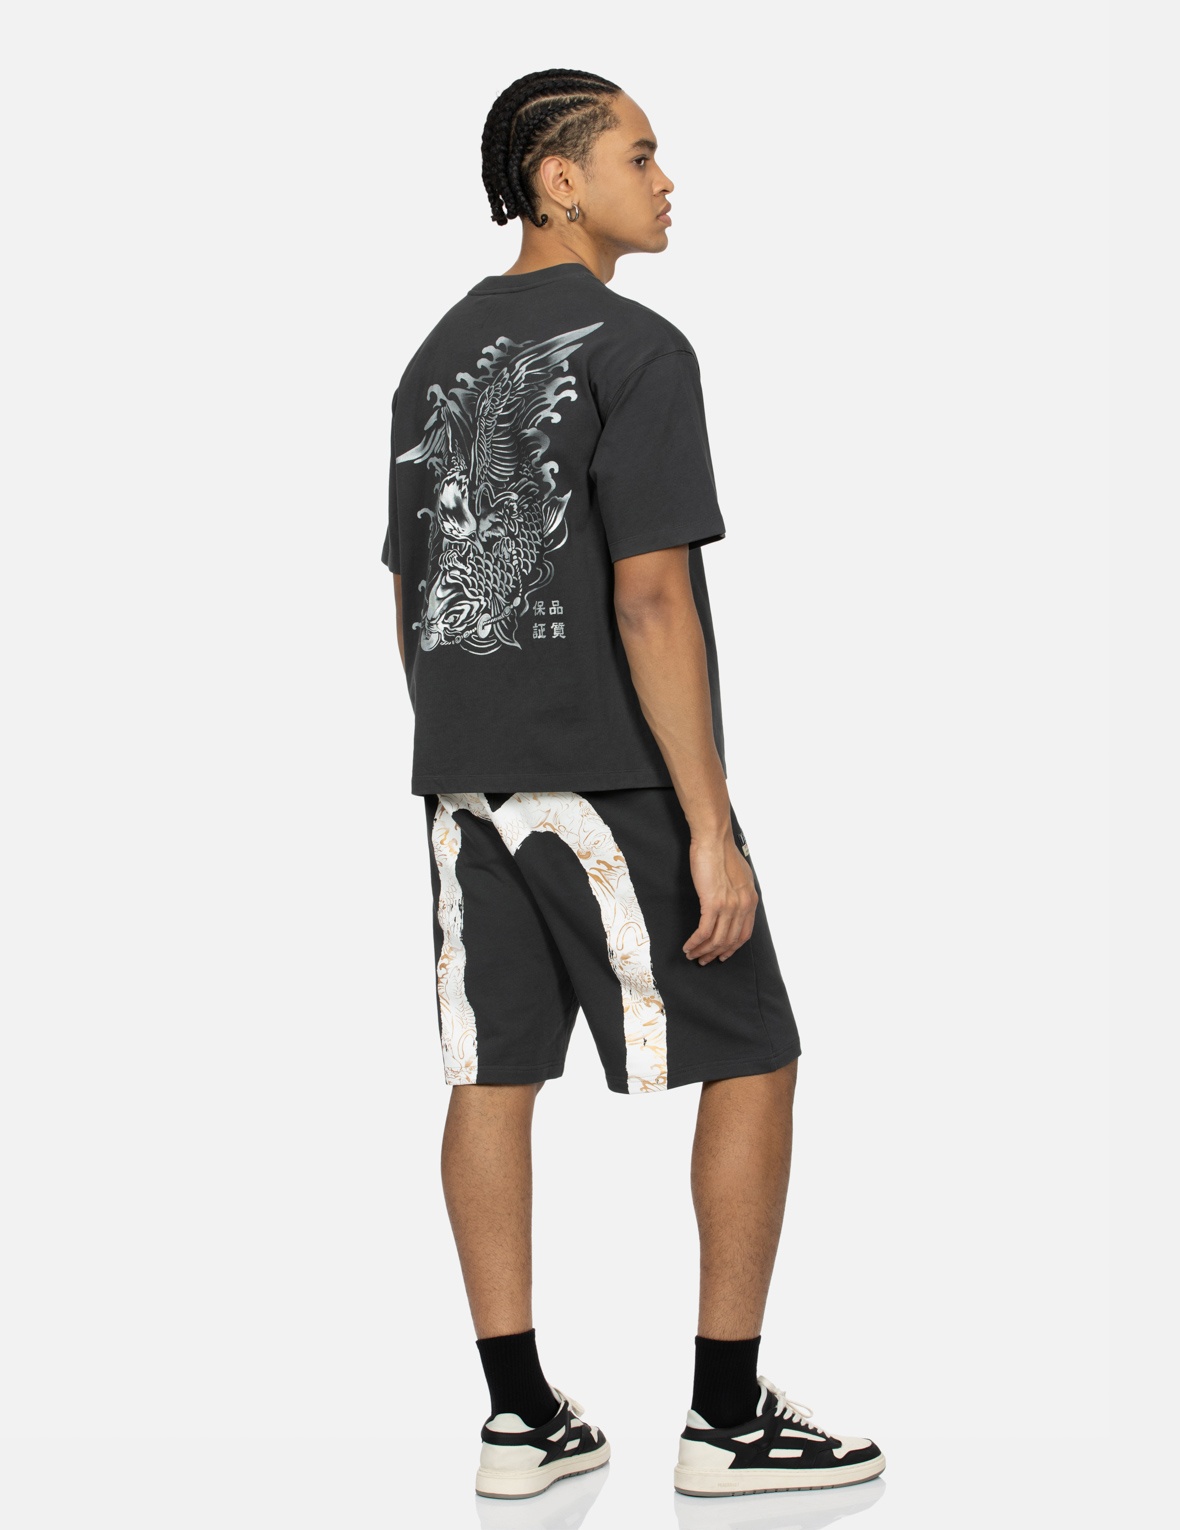 SEAGULL EMBROIDERY AND BRUSHSTROKE KOI SEAGULL DAICOCK PRINT RELAX FIT SWEAT SHORTS - 3